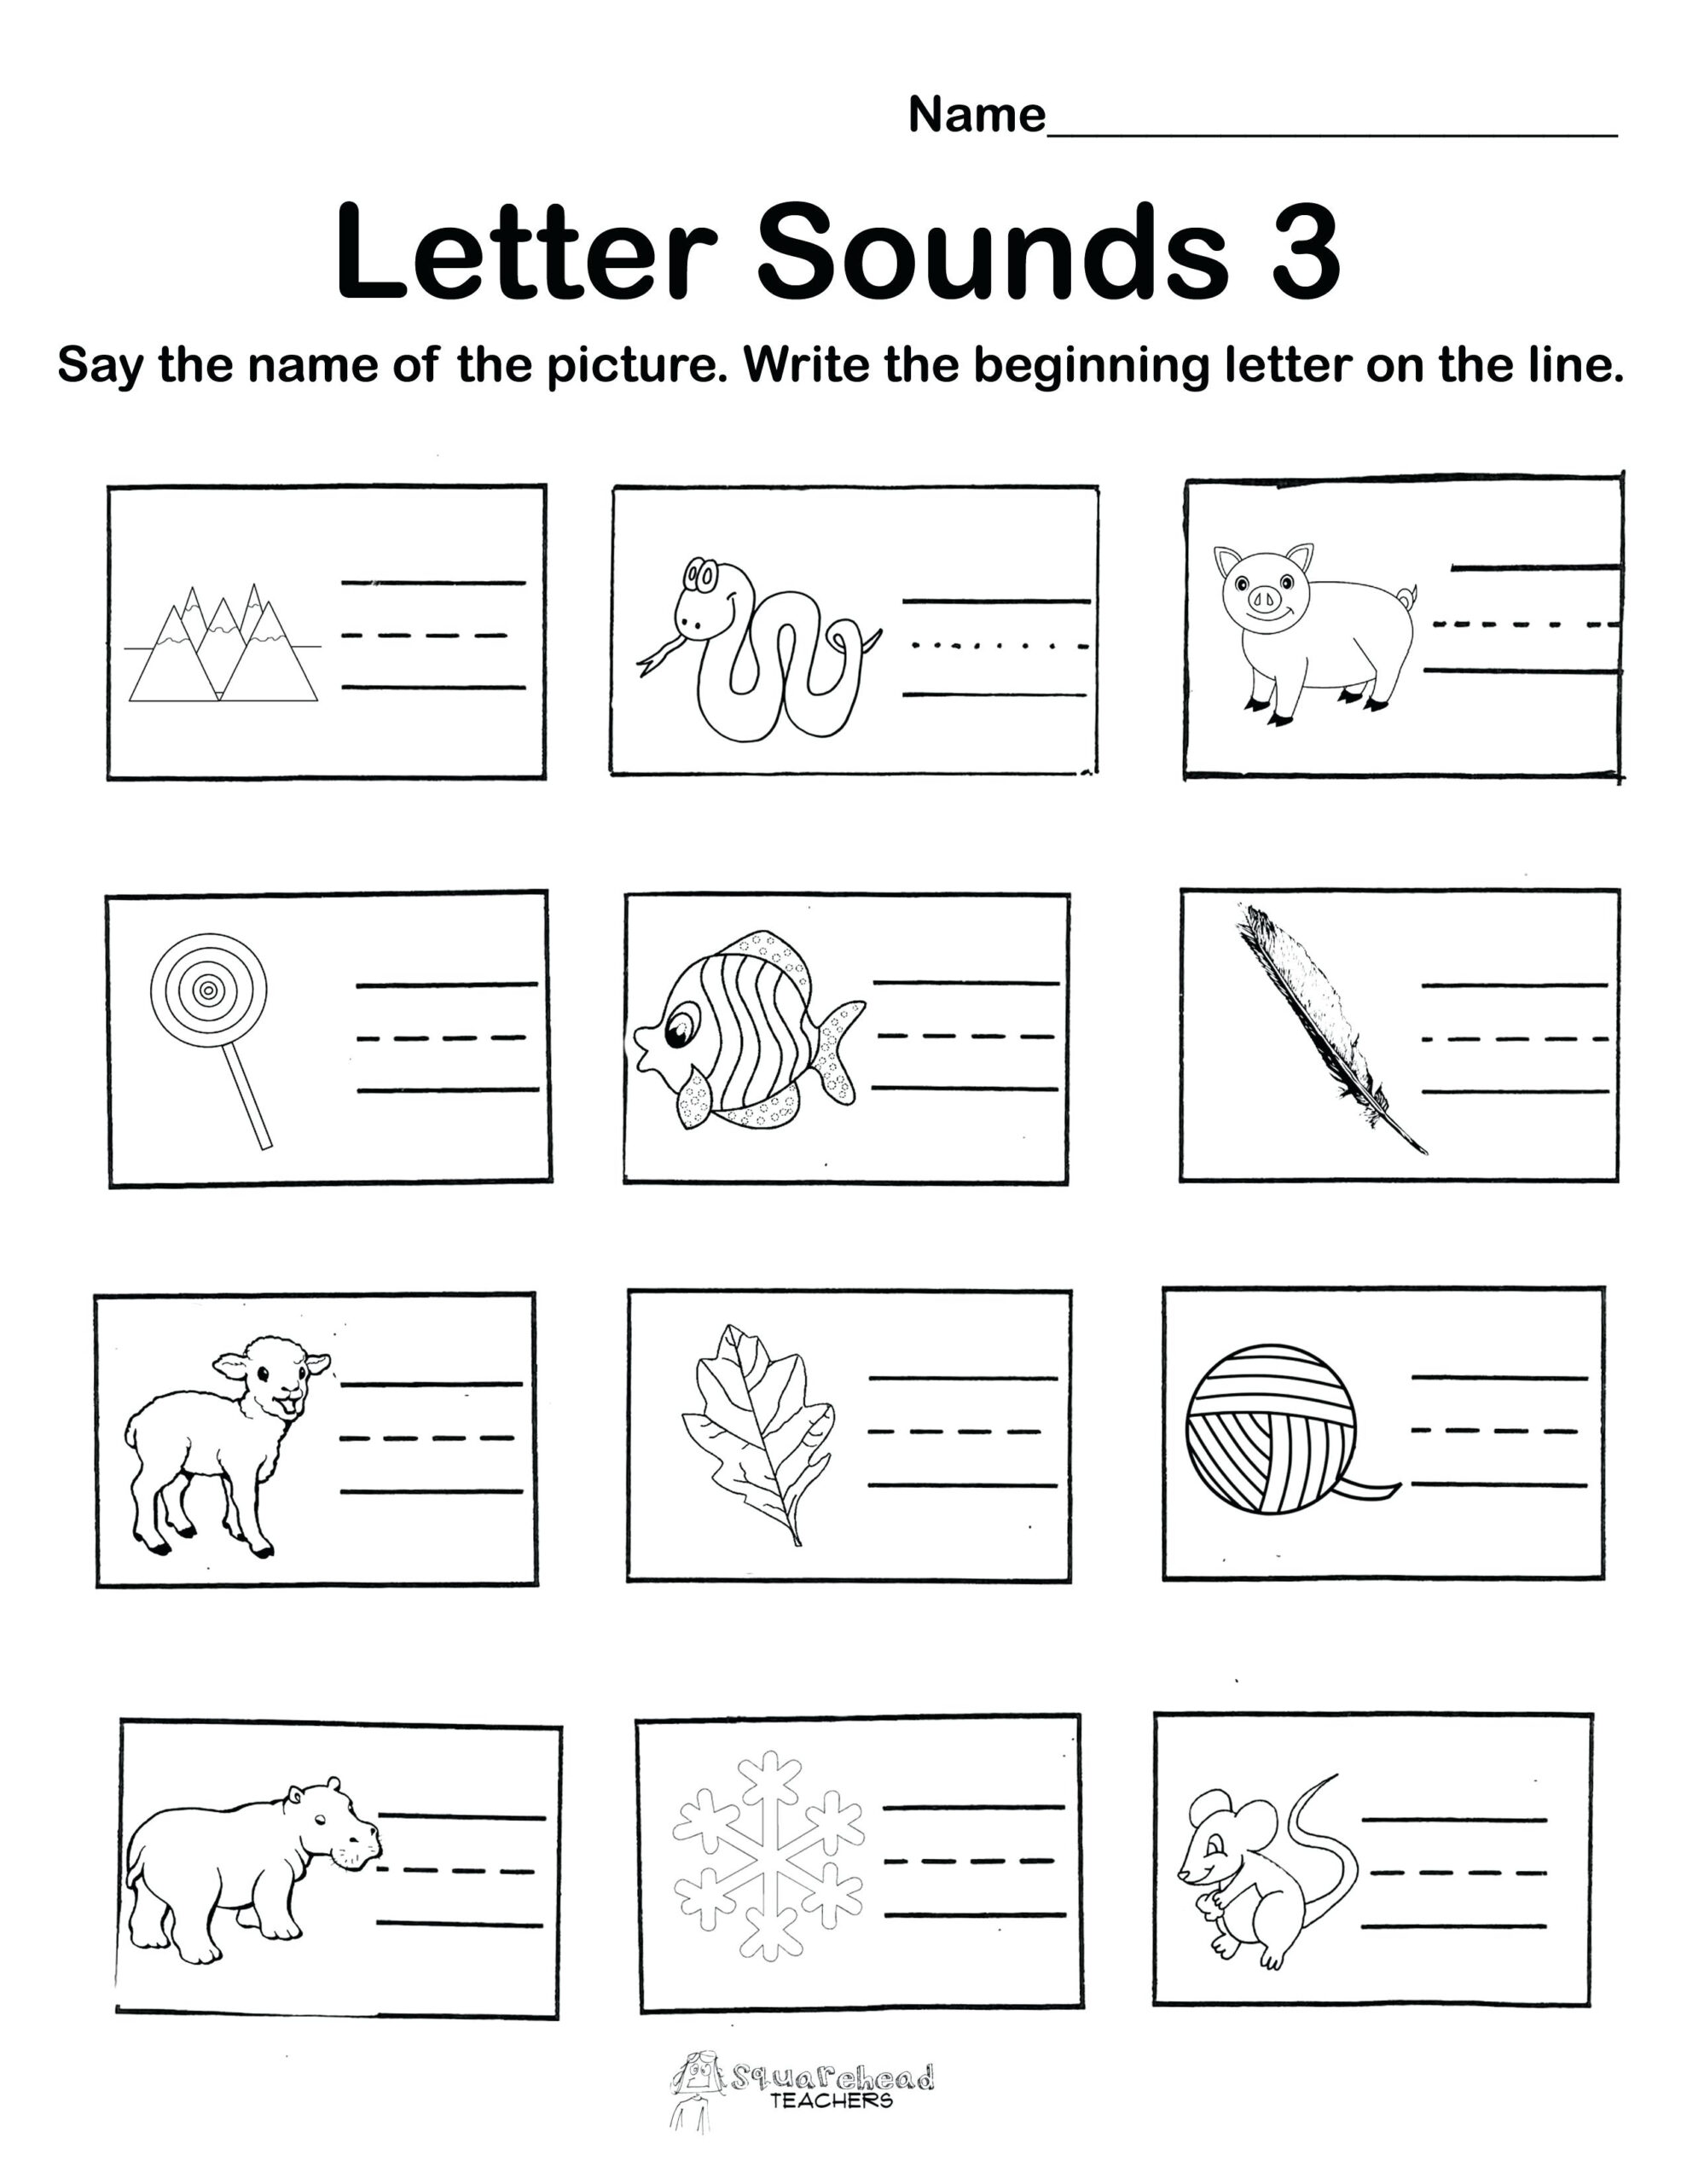 Initial Sound Worksheet Letter A Sound Initial Sound in Letter S Worksheets Twinkl